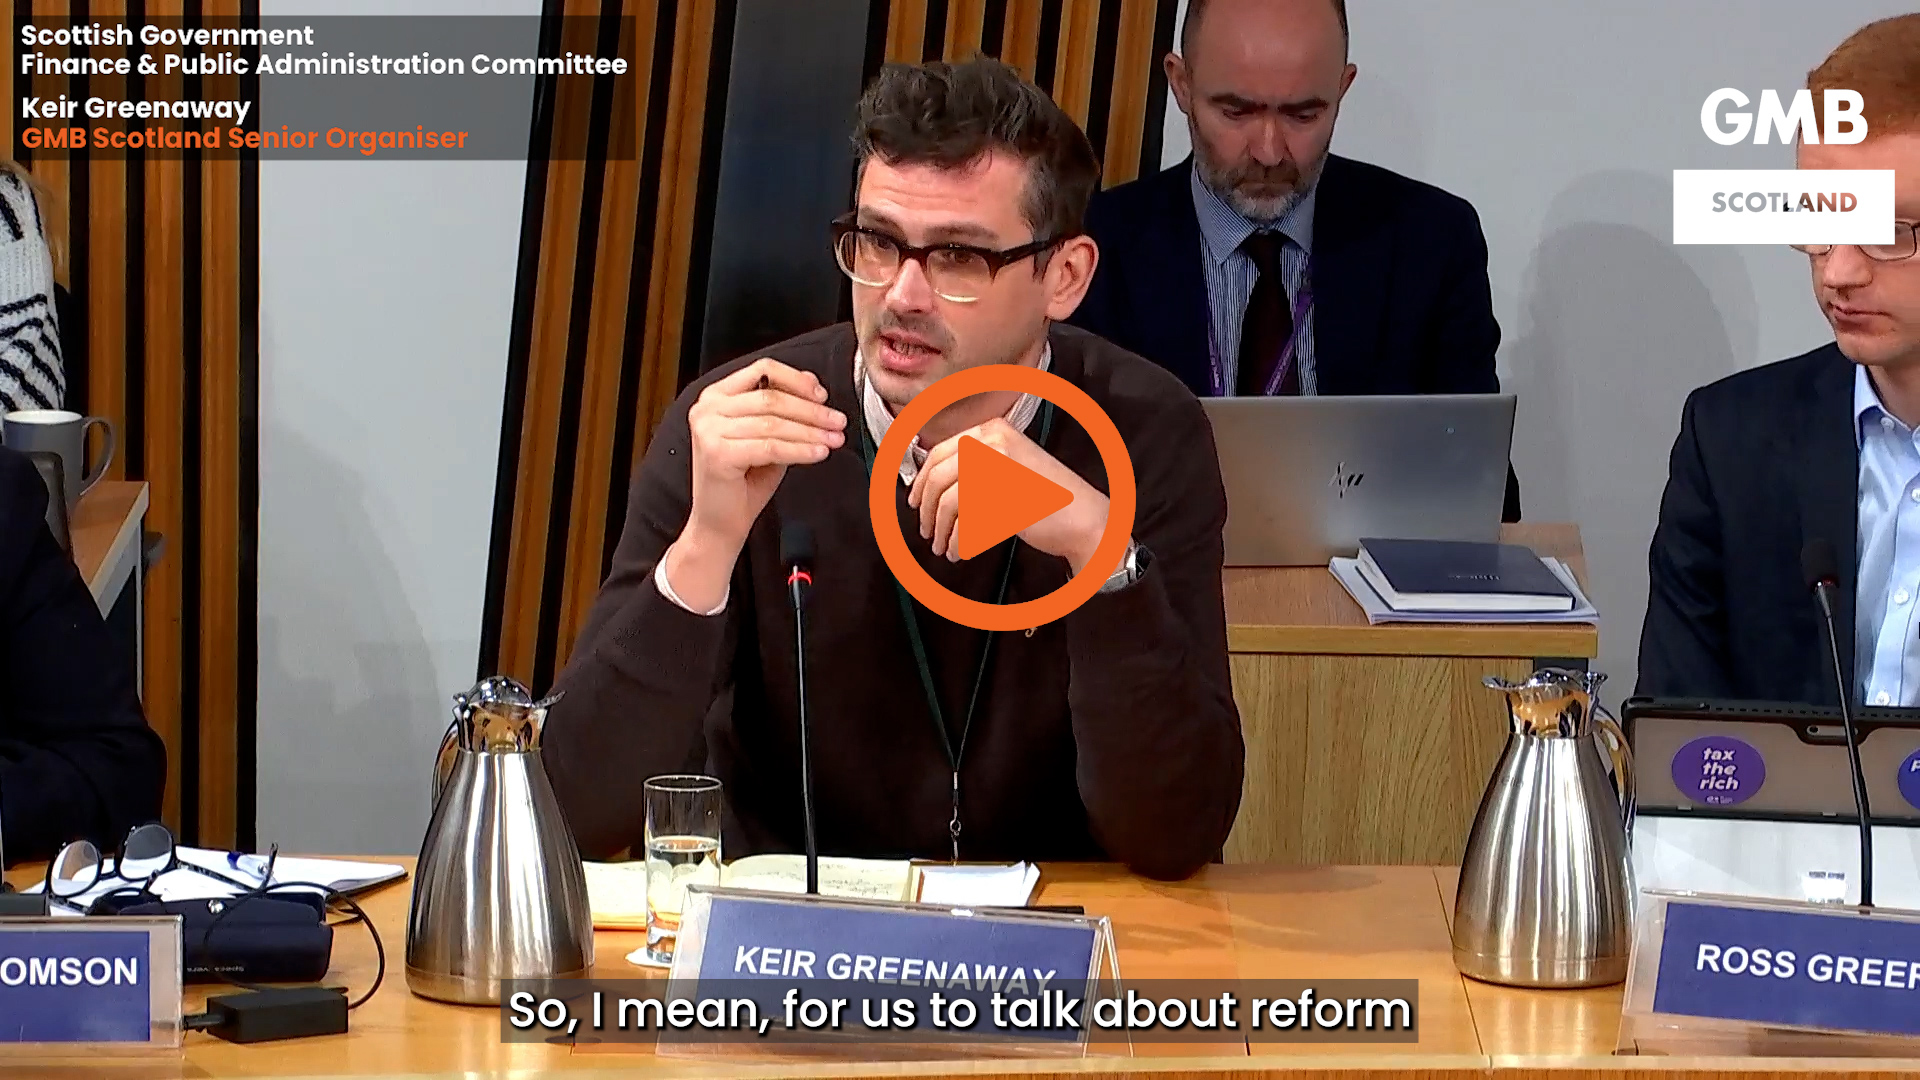 "We will not be asking our members to subsidise services wiKeir Greenaway, GMB Scotland Senior Organiser speaking today at the Scottish Governments Finance & Public Administration Committee 